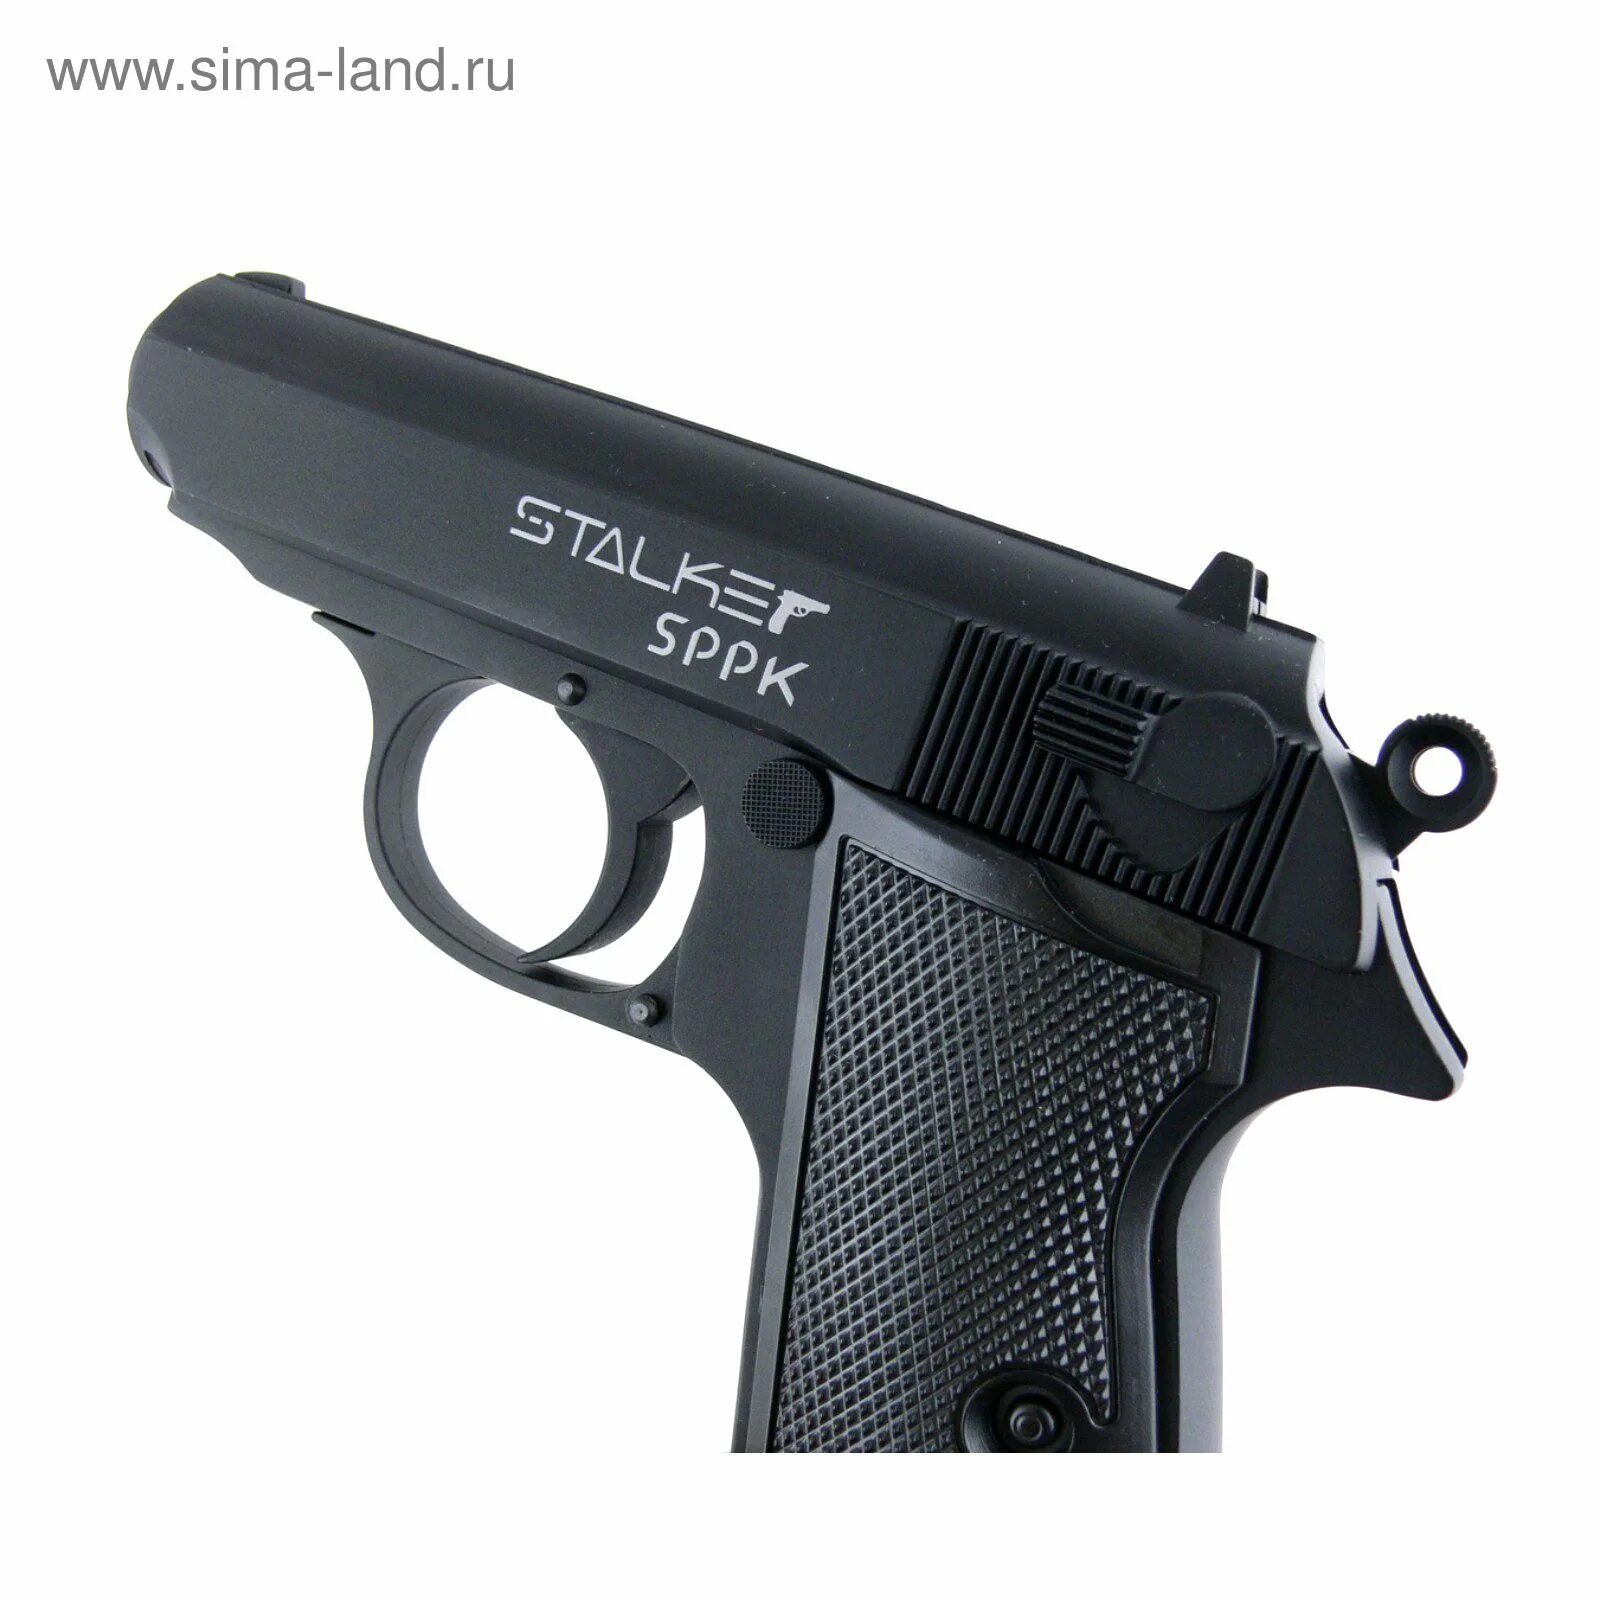 Walther ppk s. Walther PPK S 4,5 мм.